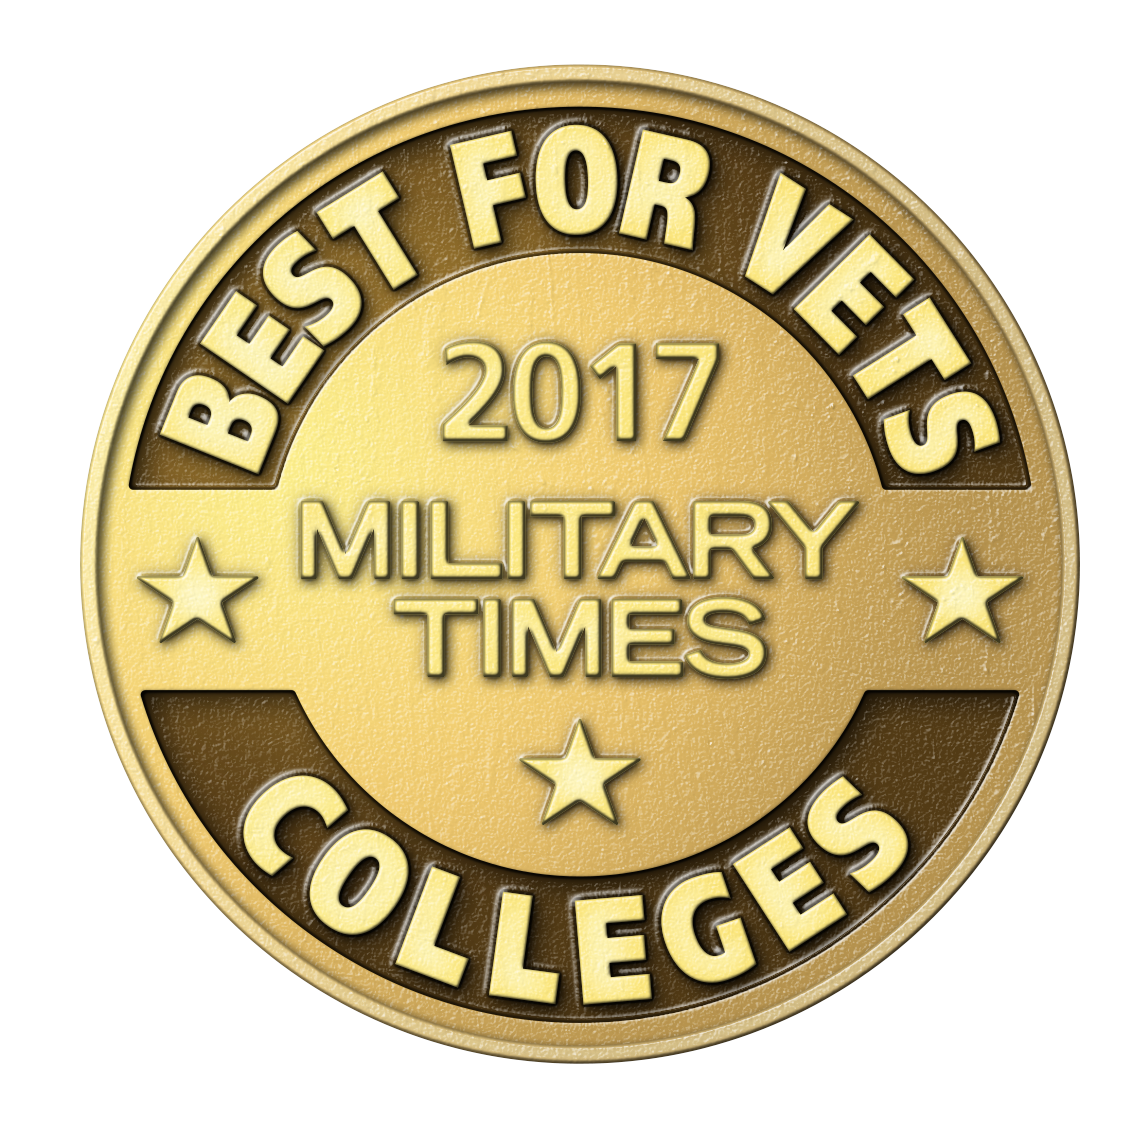 Best for Vets Colleges 2017